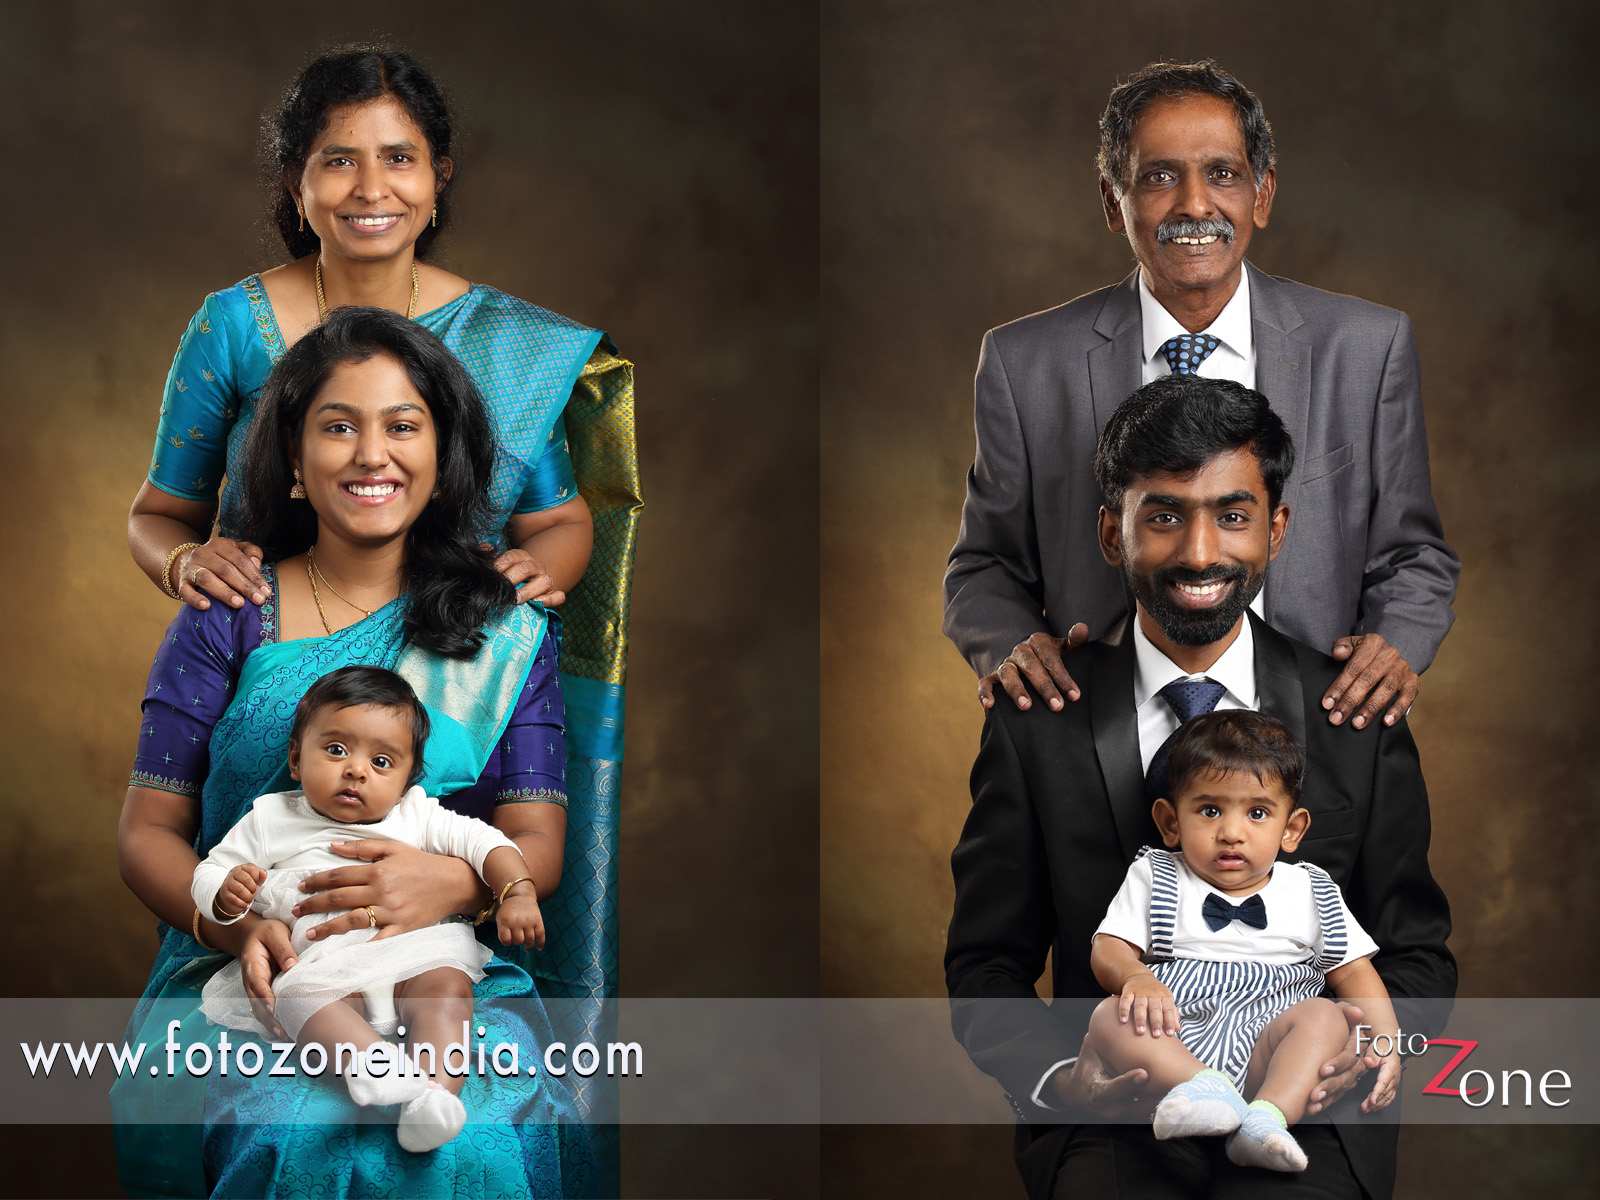 like the posing | Photography poses family, Family photo pose, Family  portrait poses